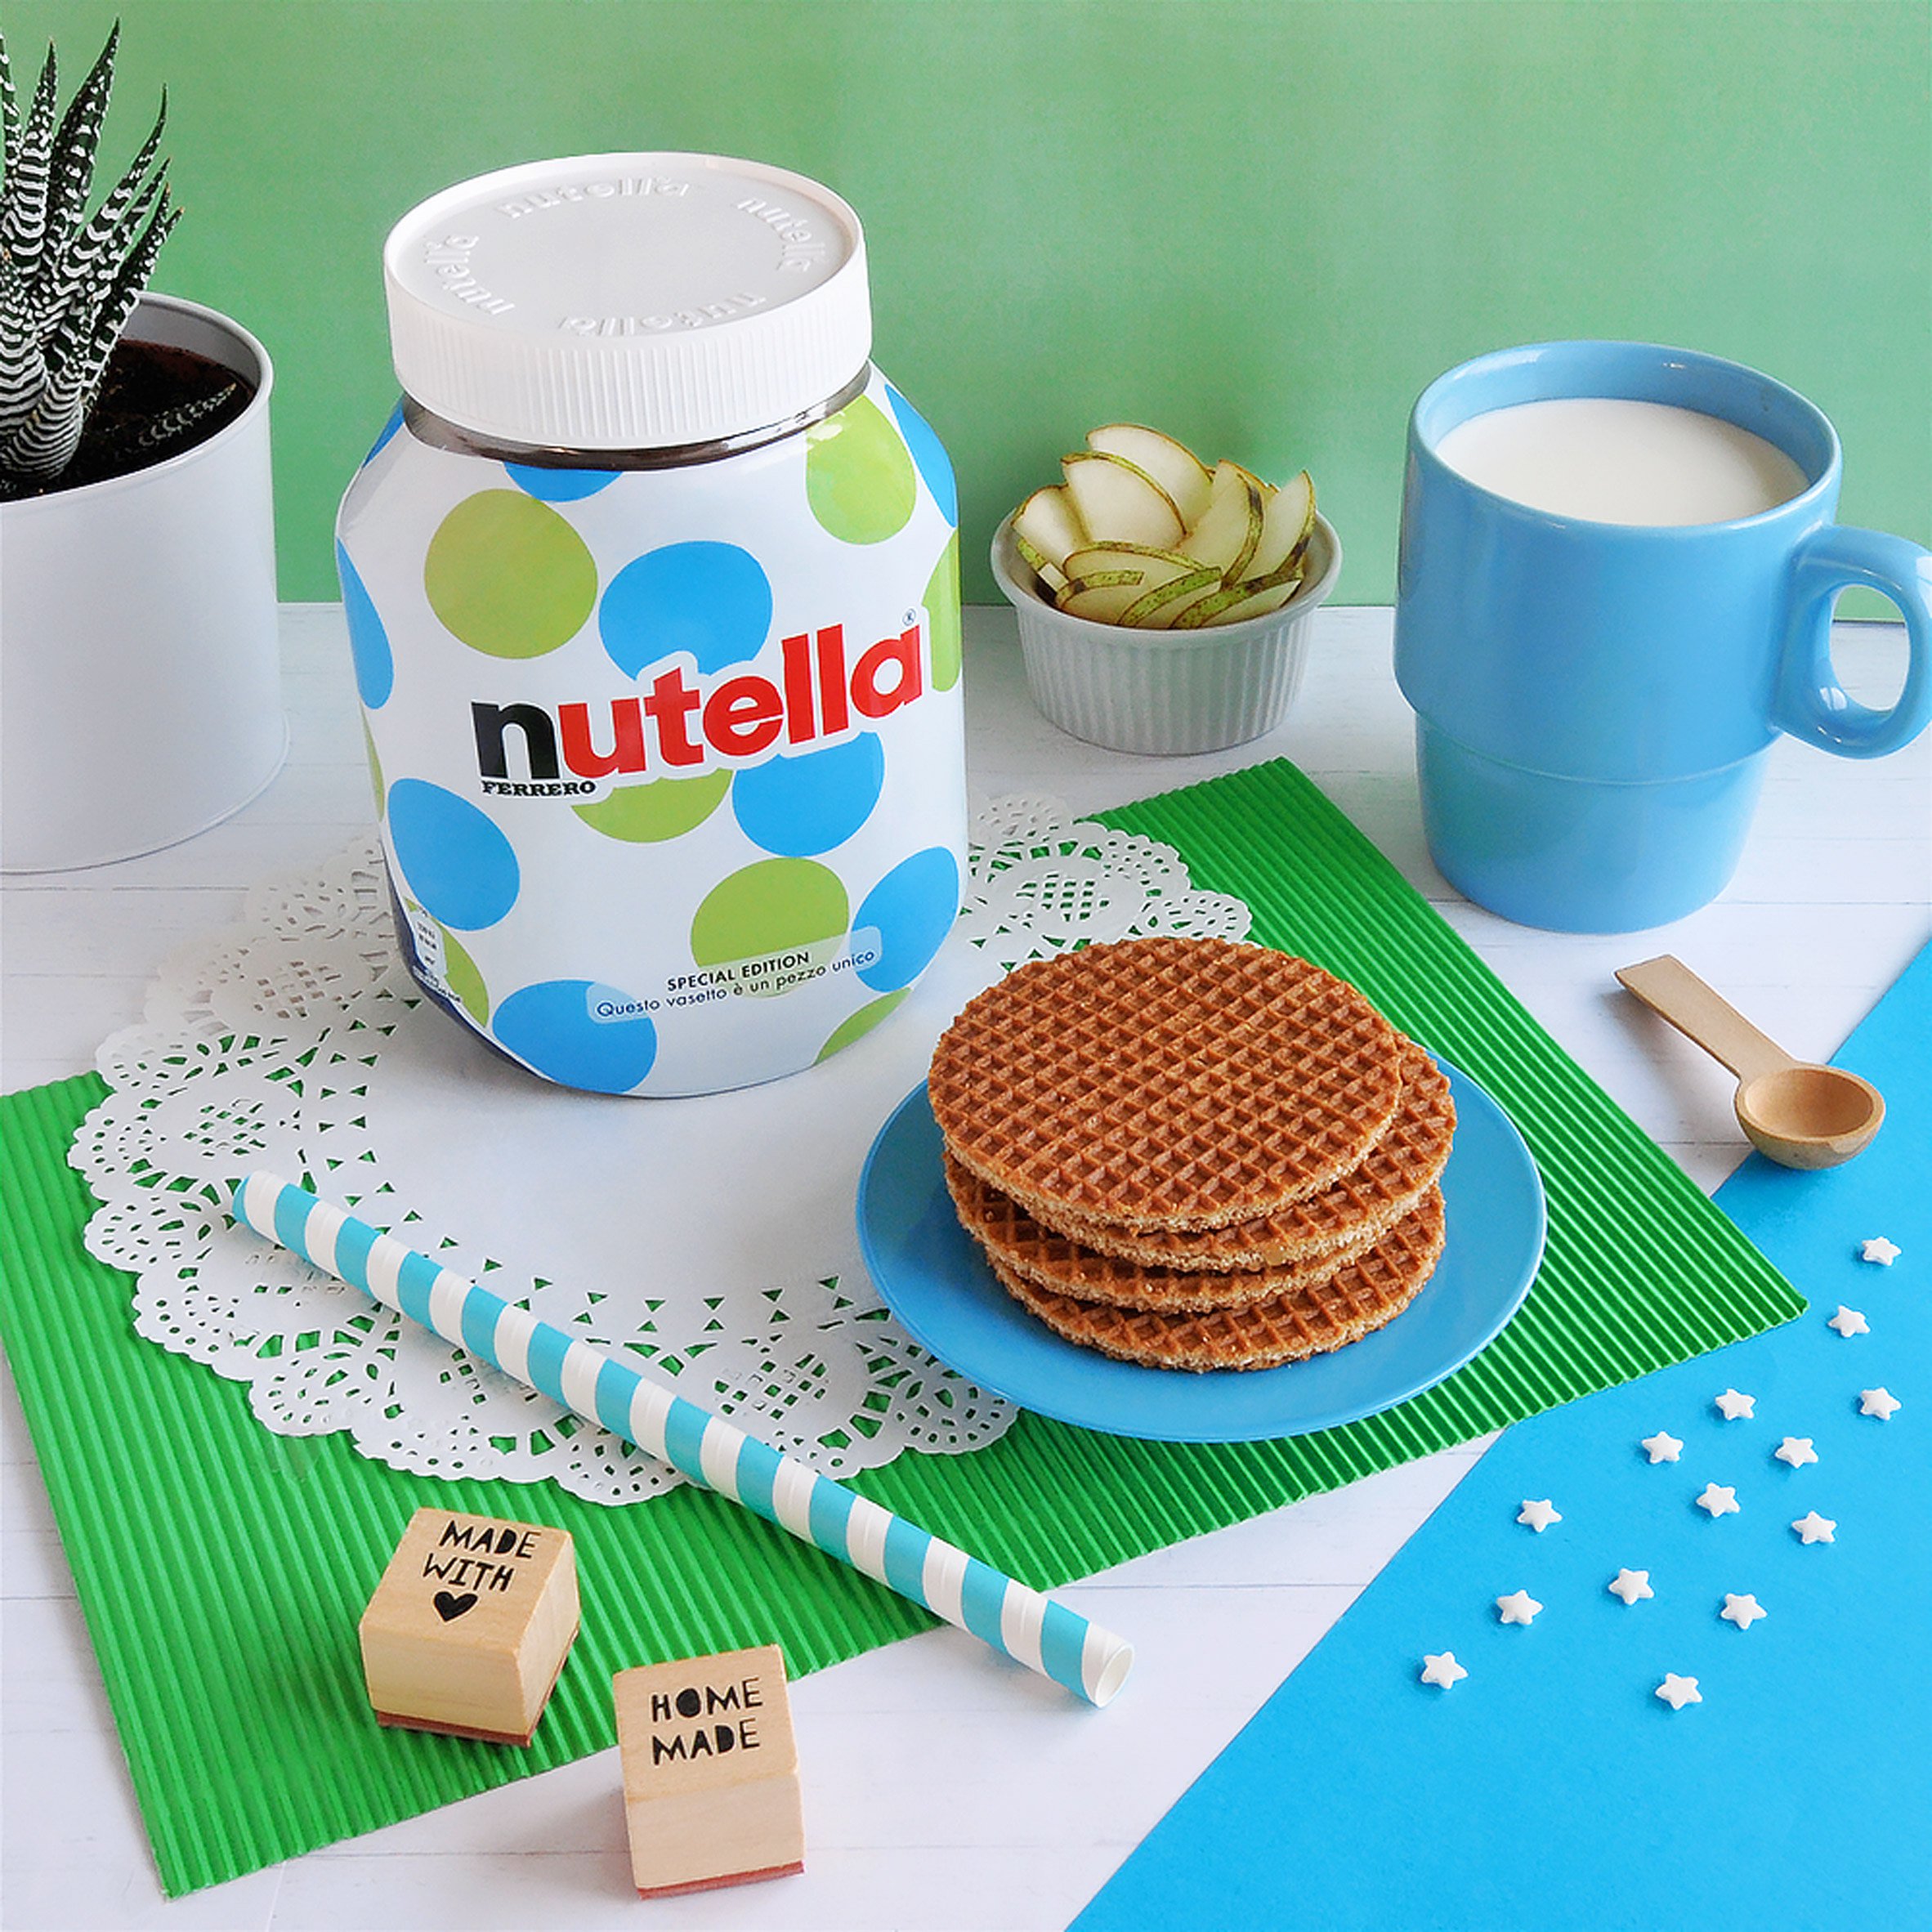 nutella-unica-packaging-design-products-_dezeen_2364_col_2